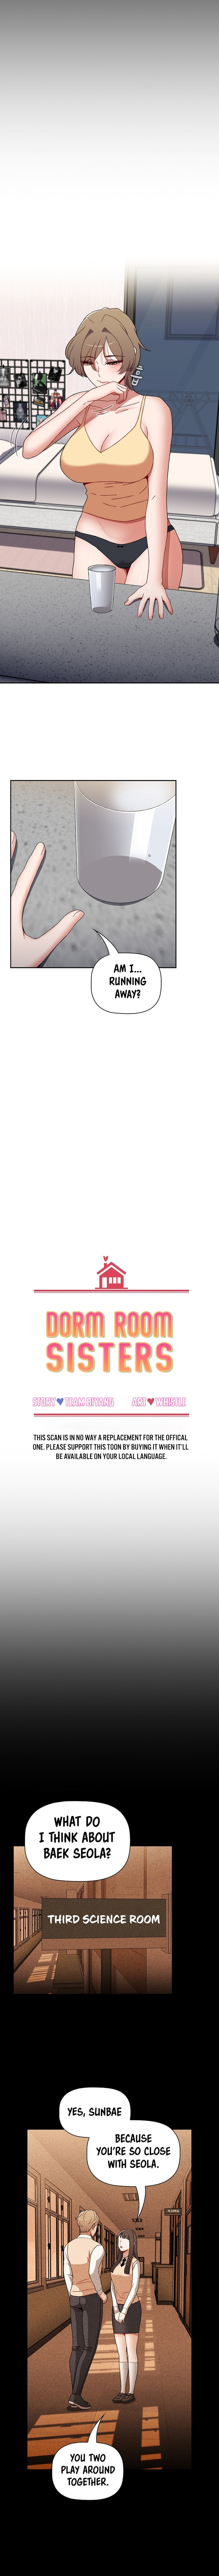 Dorm Room Sisters - Chapter 70 Page 5